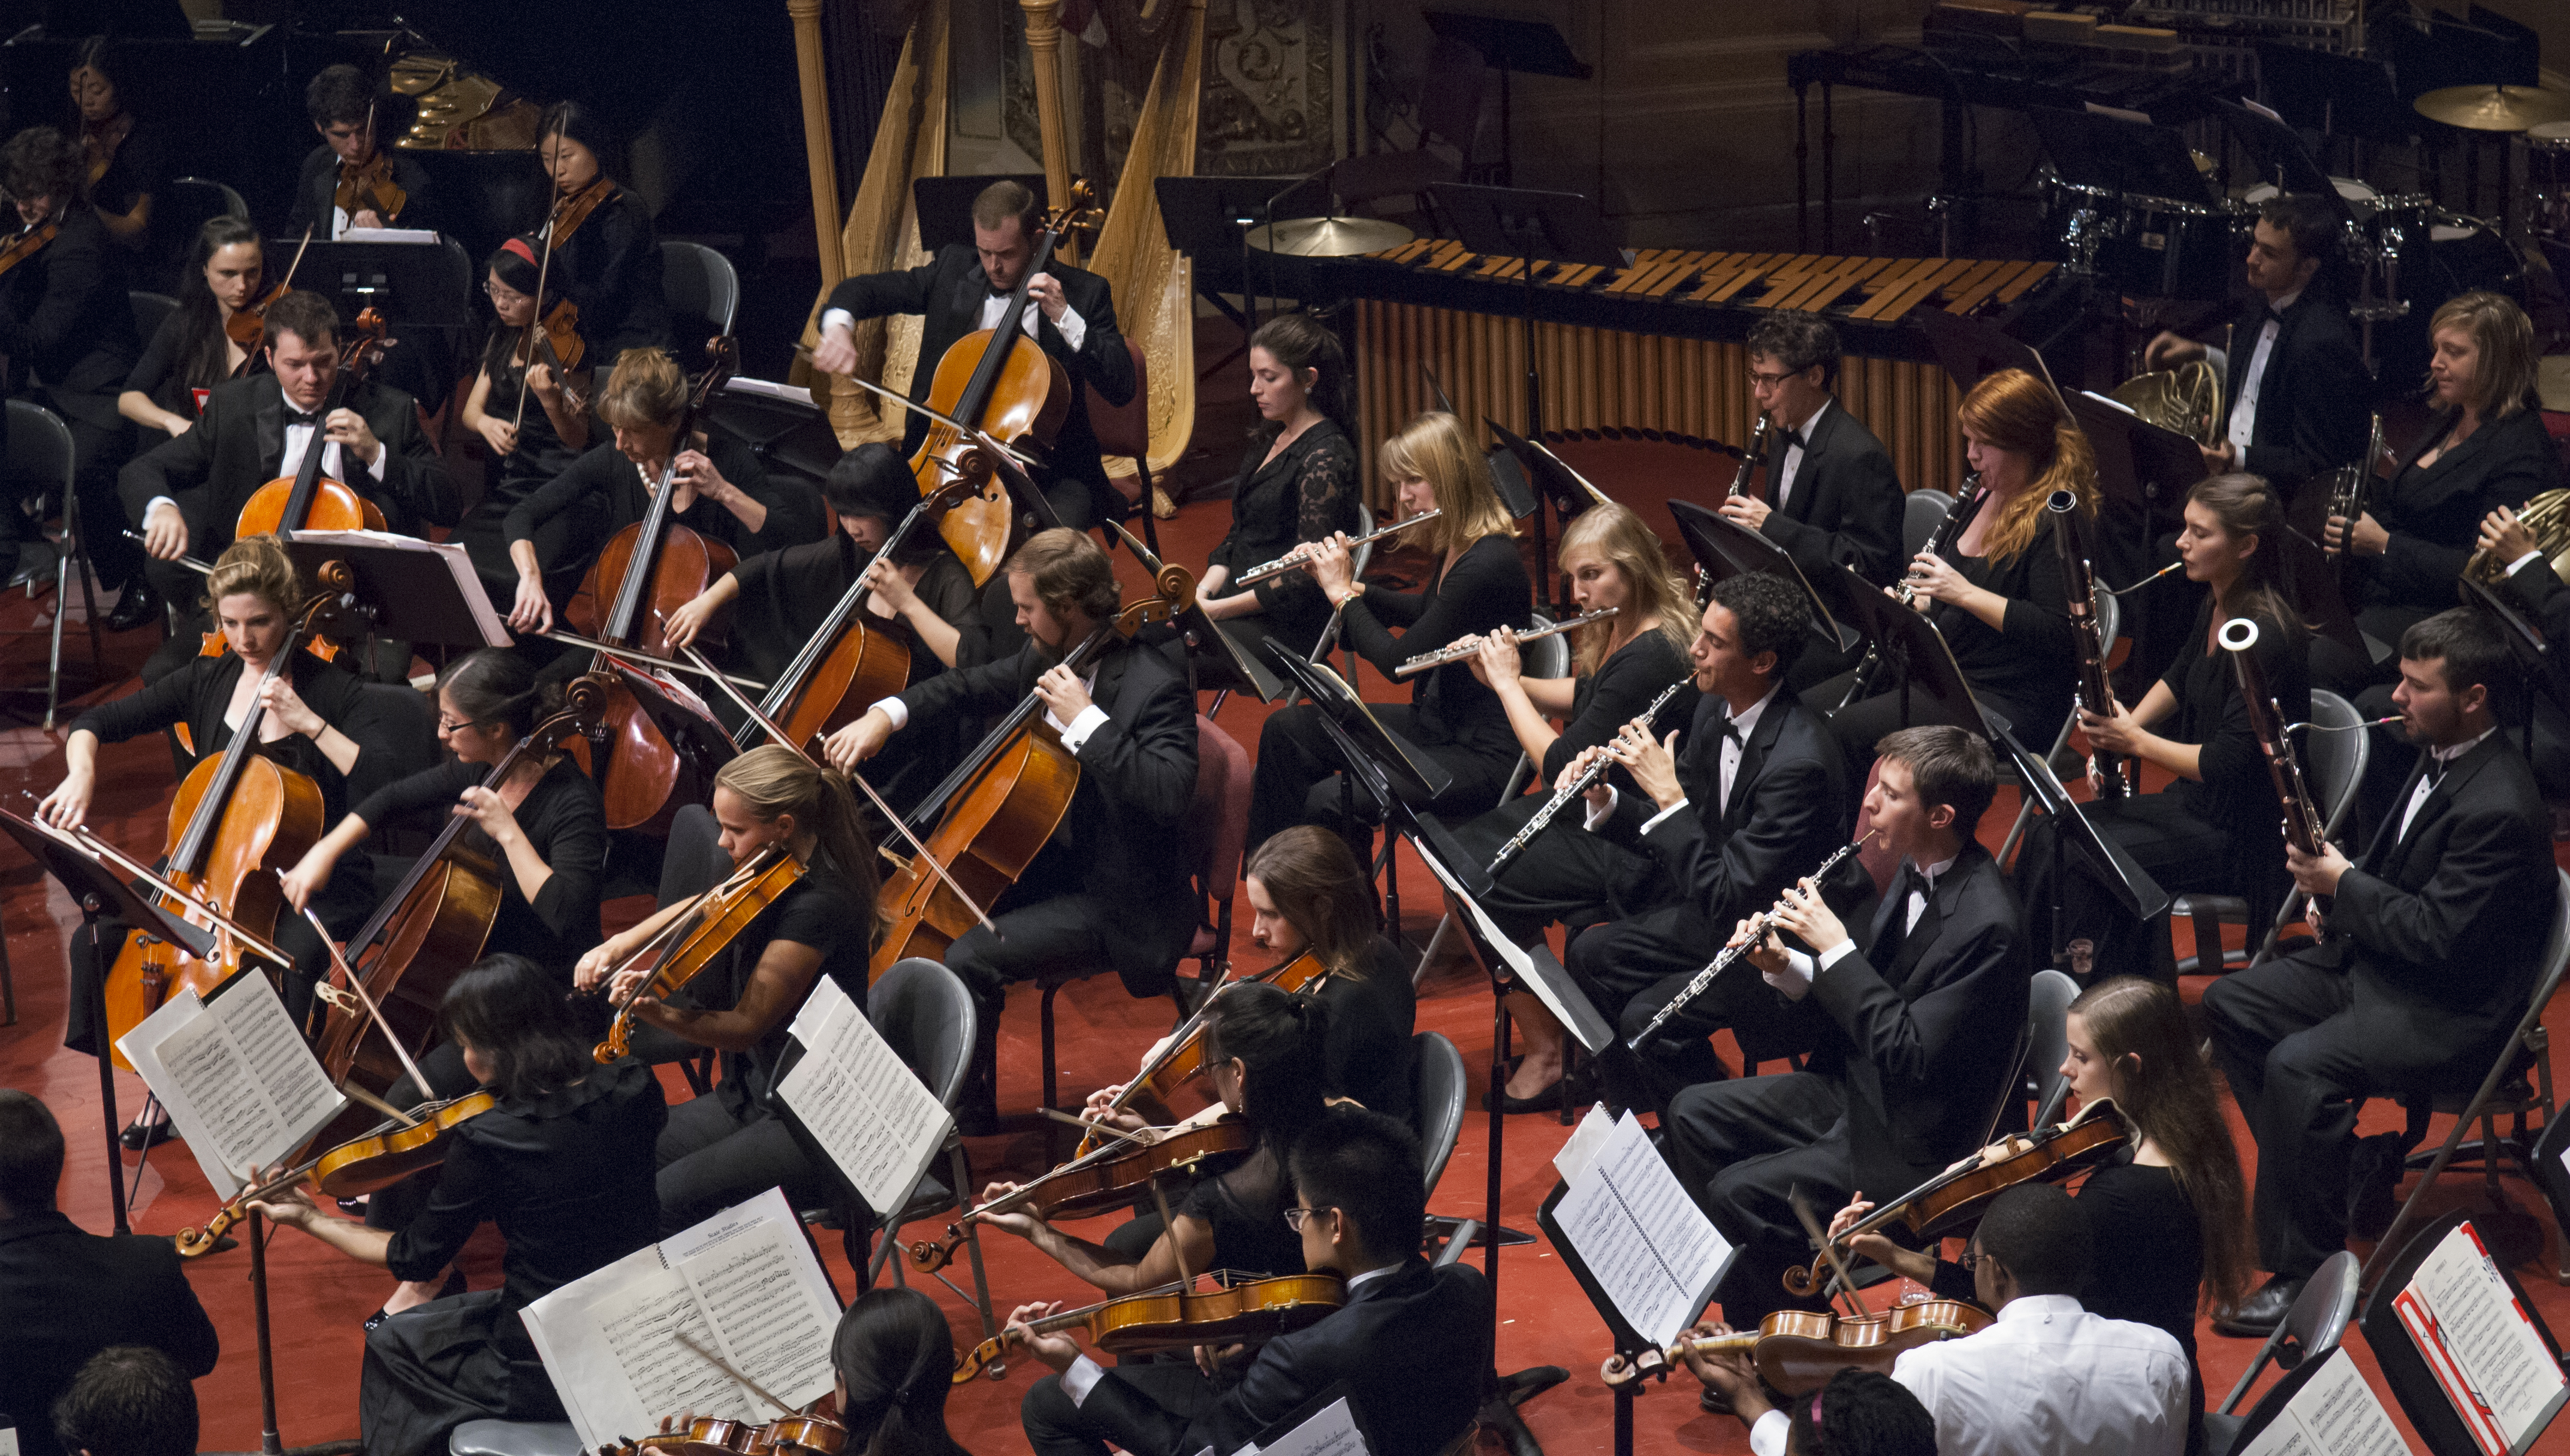 CMU students playing in a philharmonic orchestra